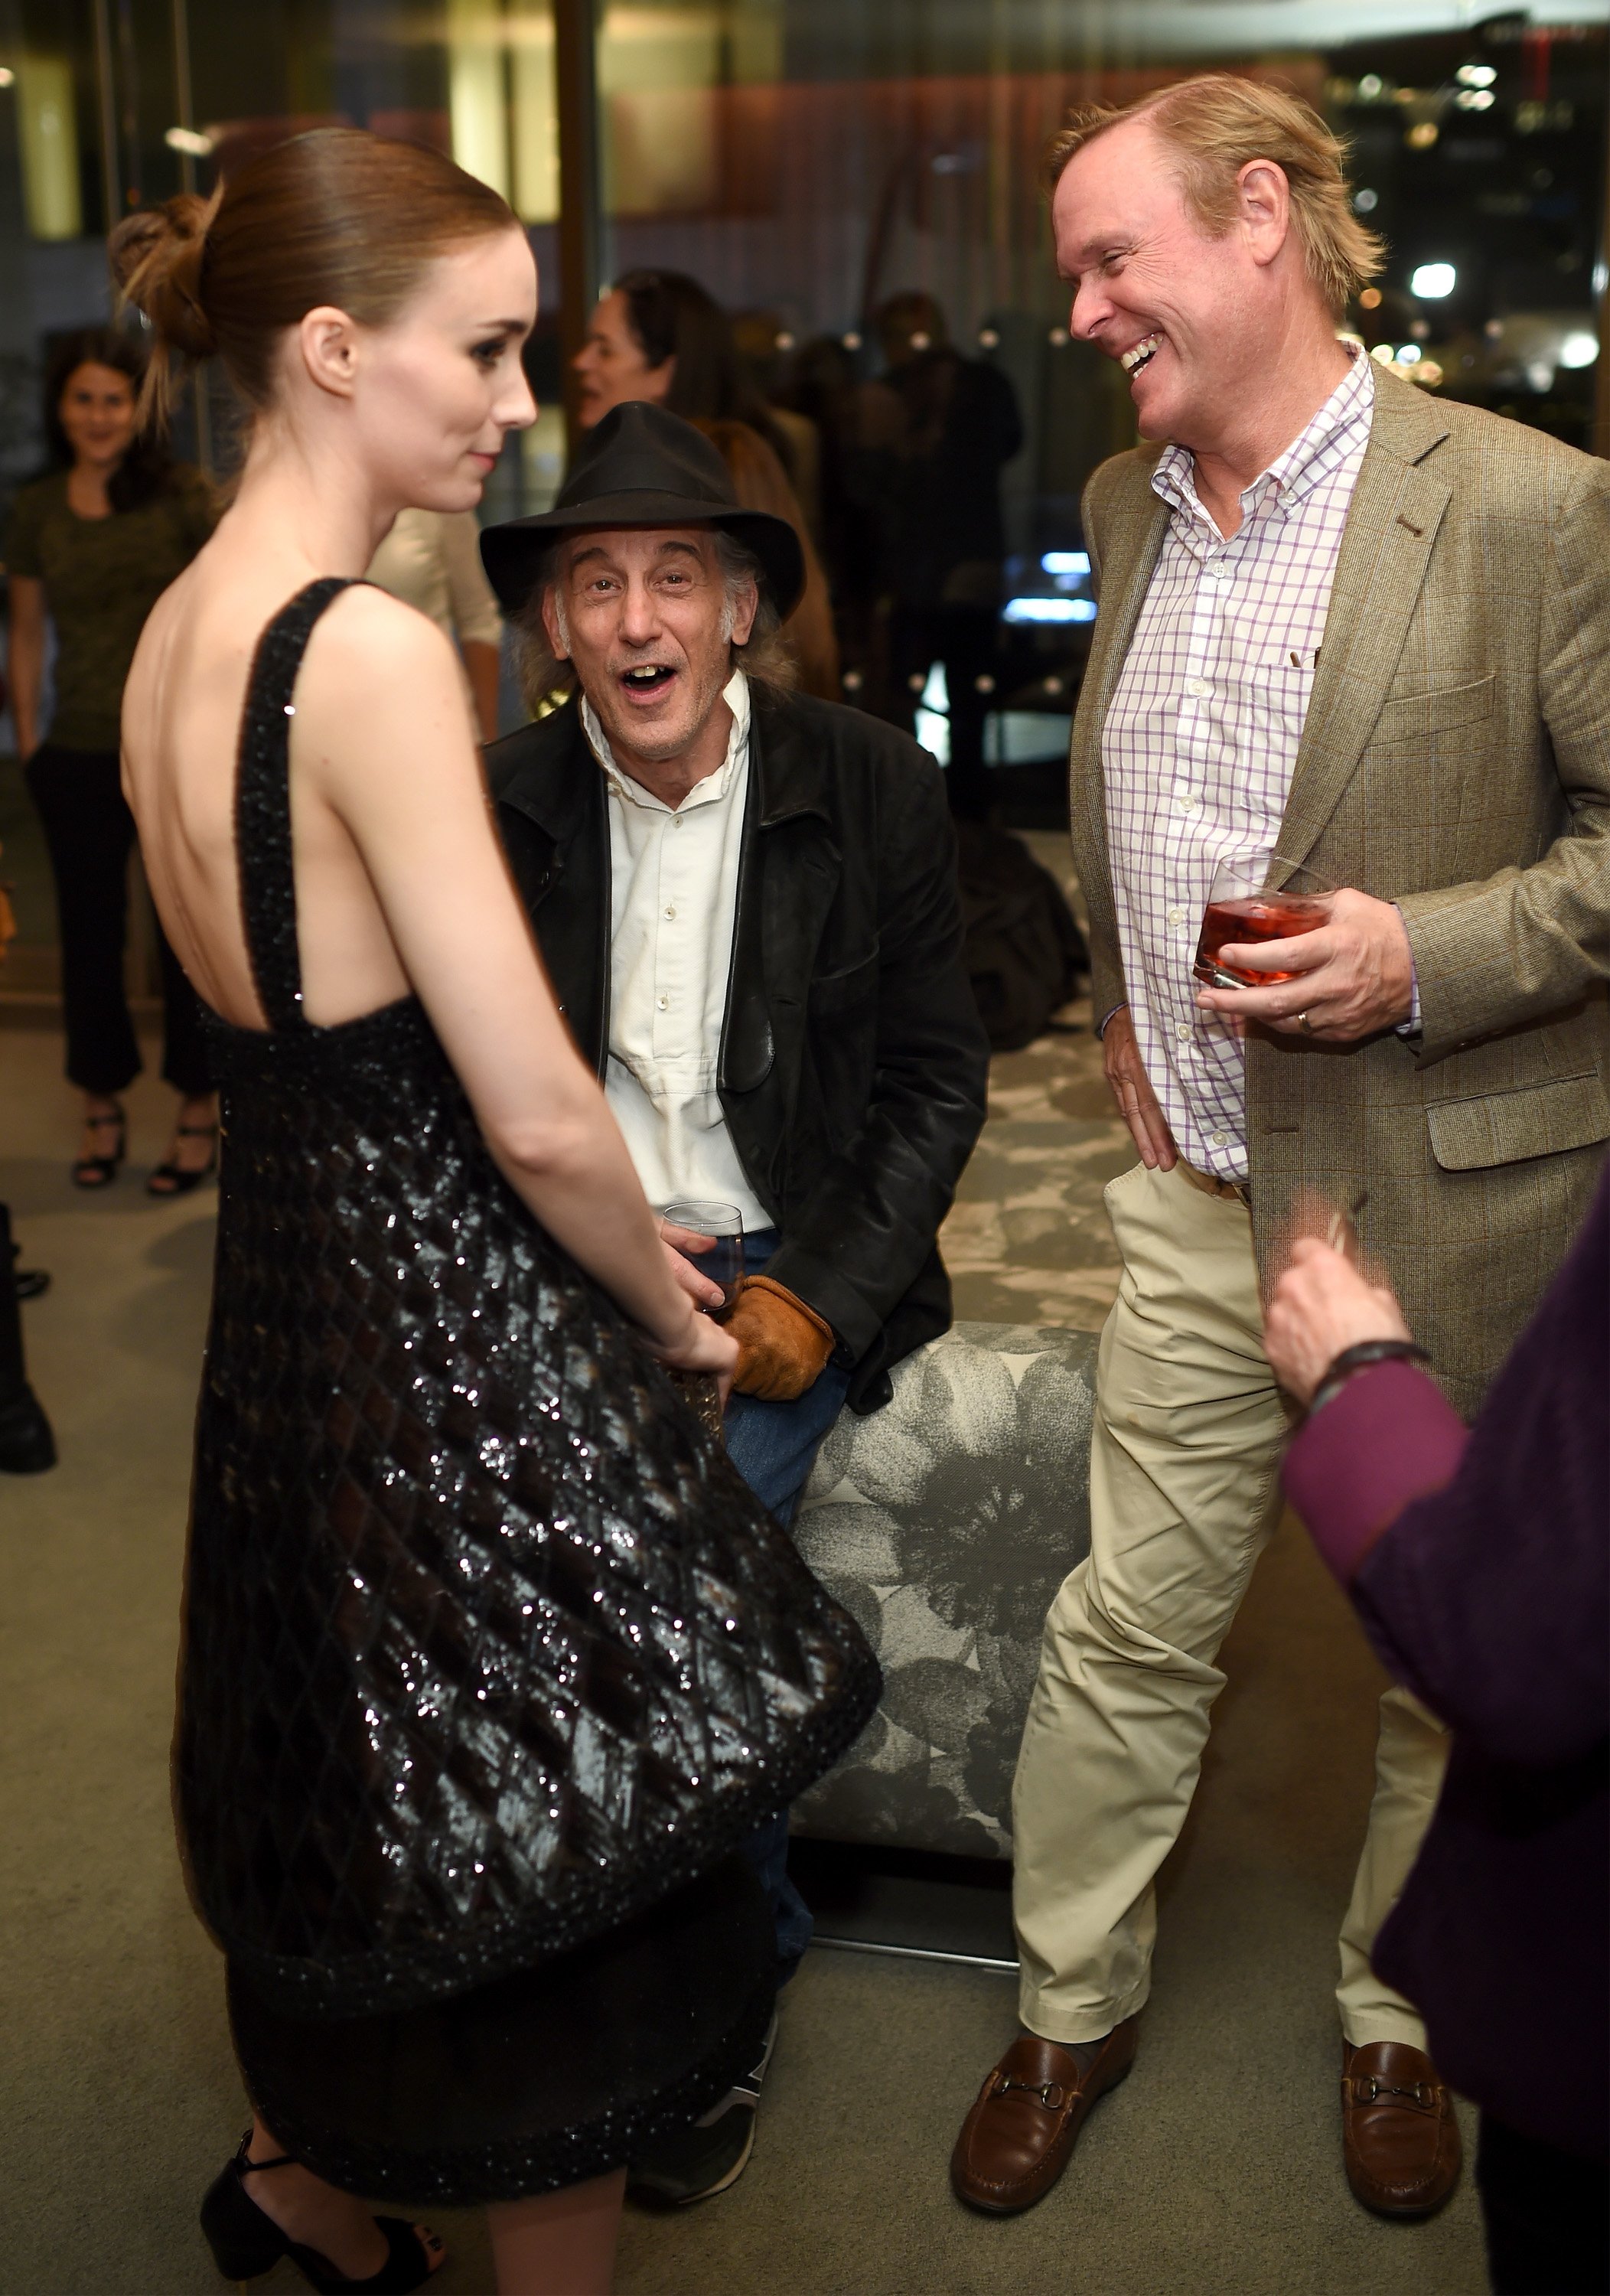 Rooney Mara, Edward Lachman, and Timothy Christopher Mara attend the reception for the premiere of "Carol" on October 9, 2015, in New York City. | Source: Getty Images